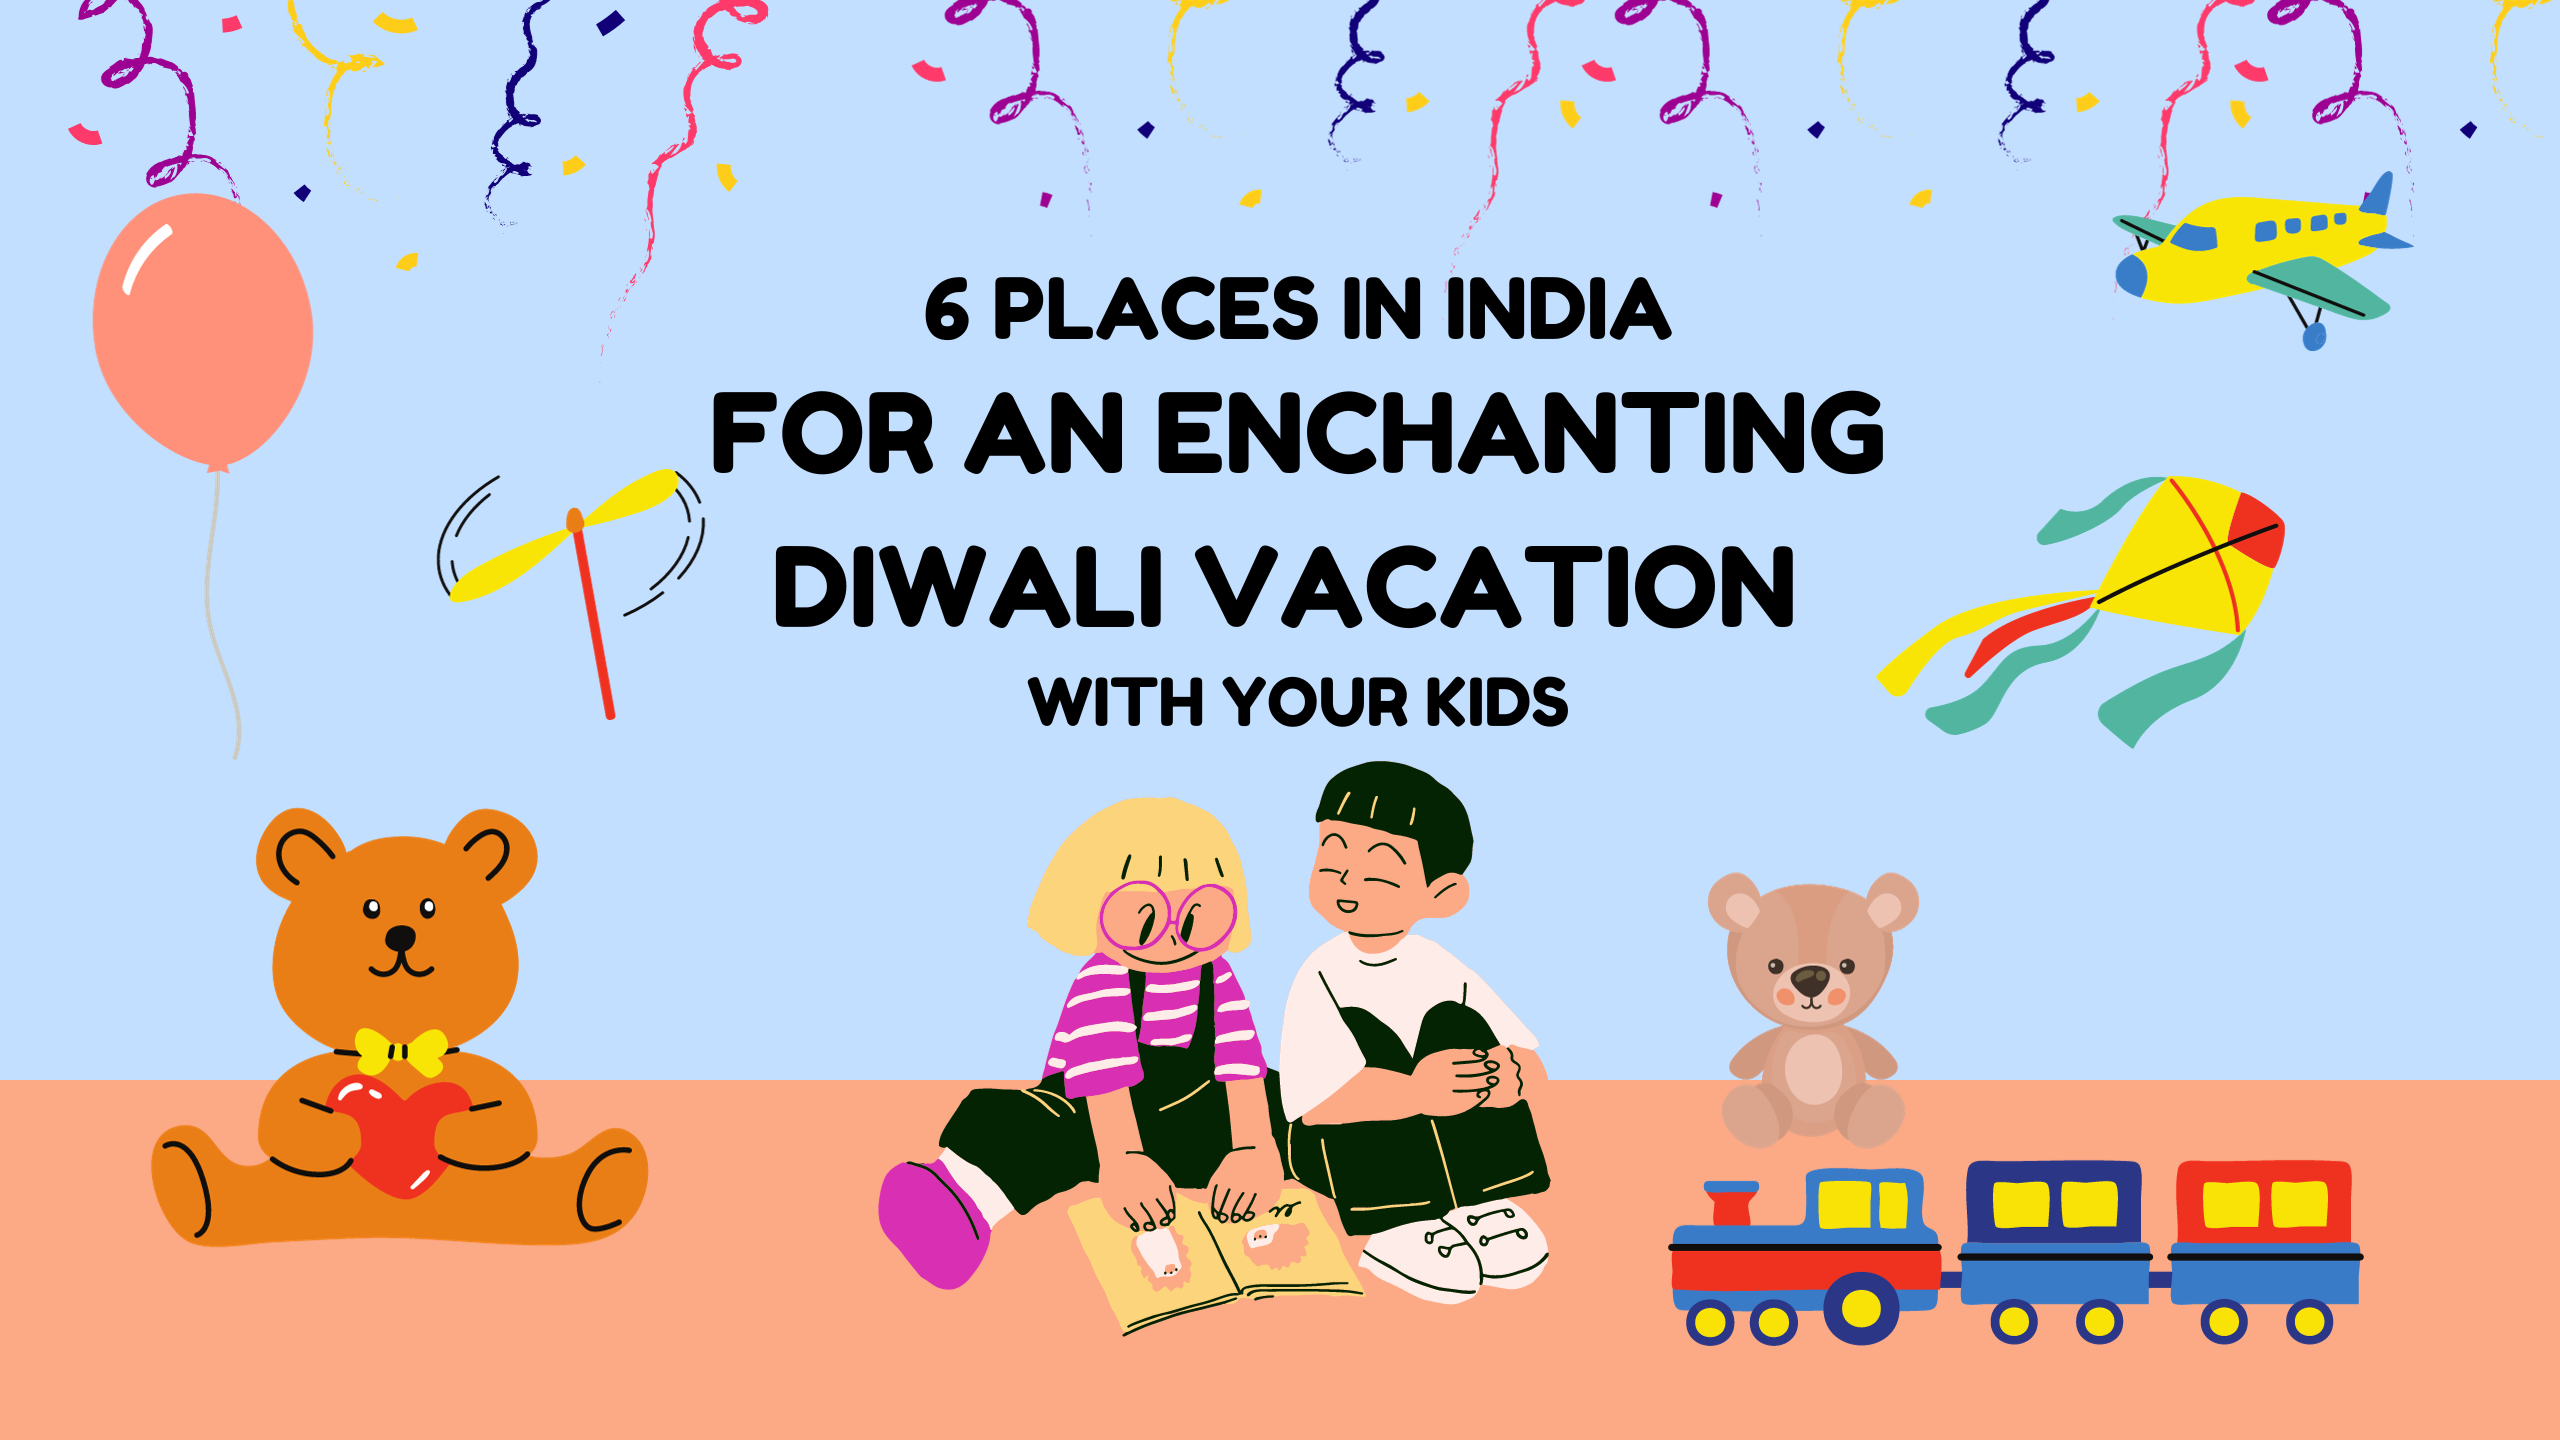 6 Places in India for an Enchanting Diwali Vacation with Your Kids